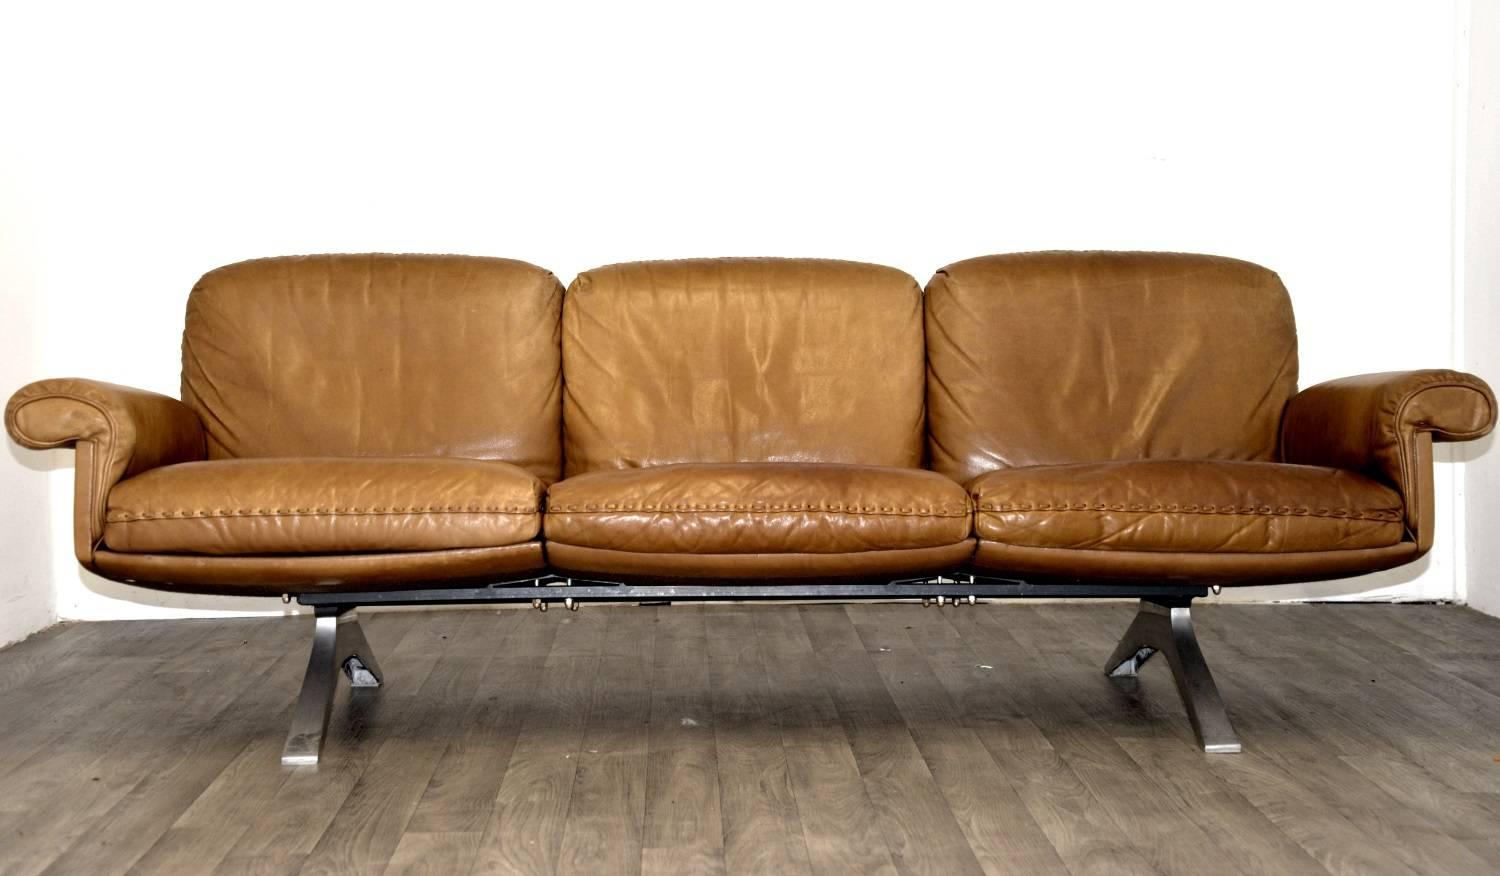 Discounted airfreight for our US Continent and International customers ( from 2 weeks door to door) 

We are delighted to bring to you a vintage de Sede DS 31 three-seat sofa in beautiful soft cognac aniline leather with superb whipstitch edge